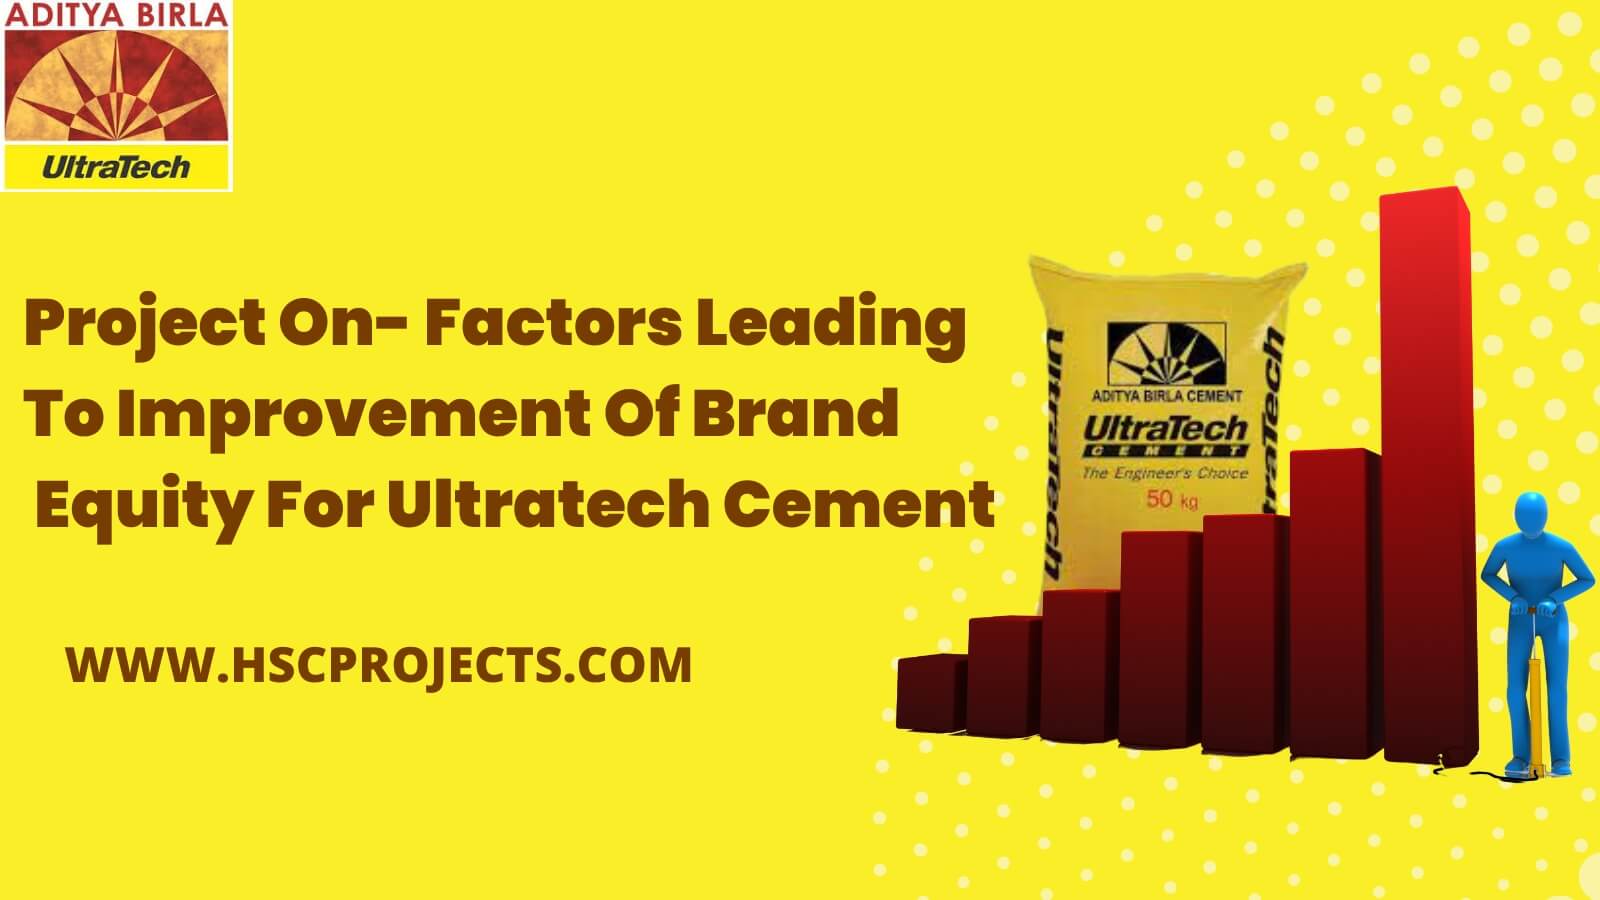 UltraTech Q1 net profit falls 7 pc to Rs 1,582 crore; net sales rise 28 pc  to Rs 15,164 crore | Business News - The Indian Express